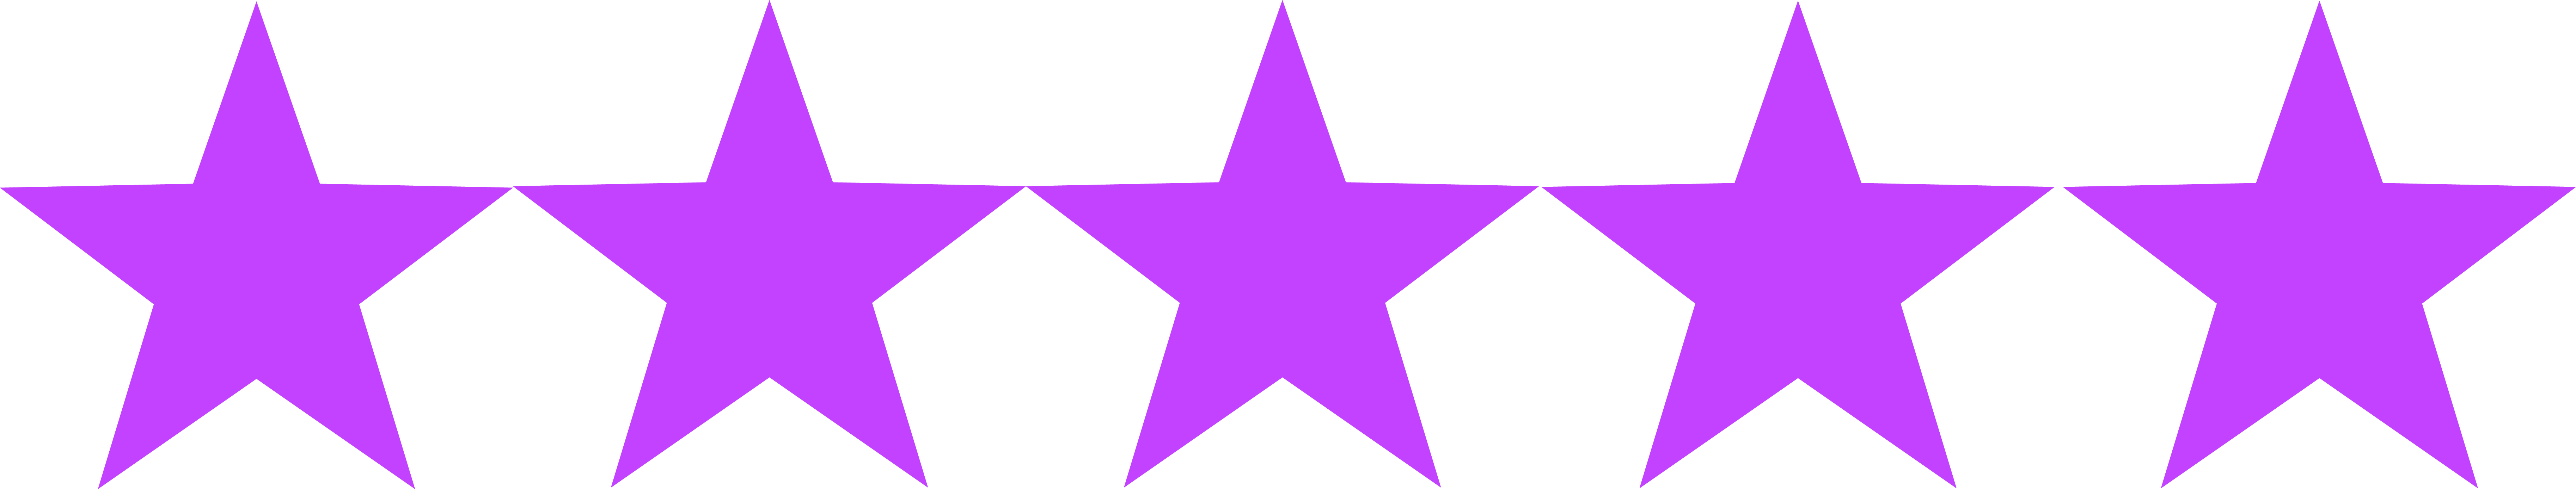 82-828860_lent-madness-5-star-rating-purple.png